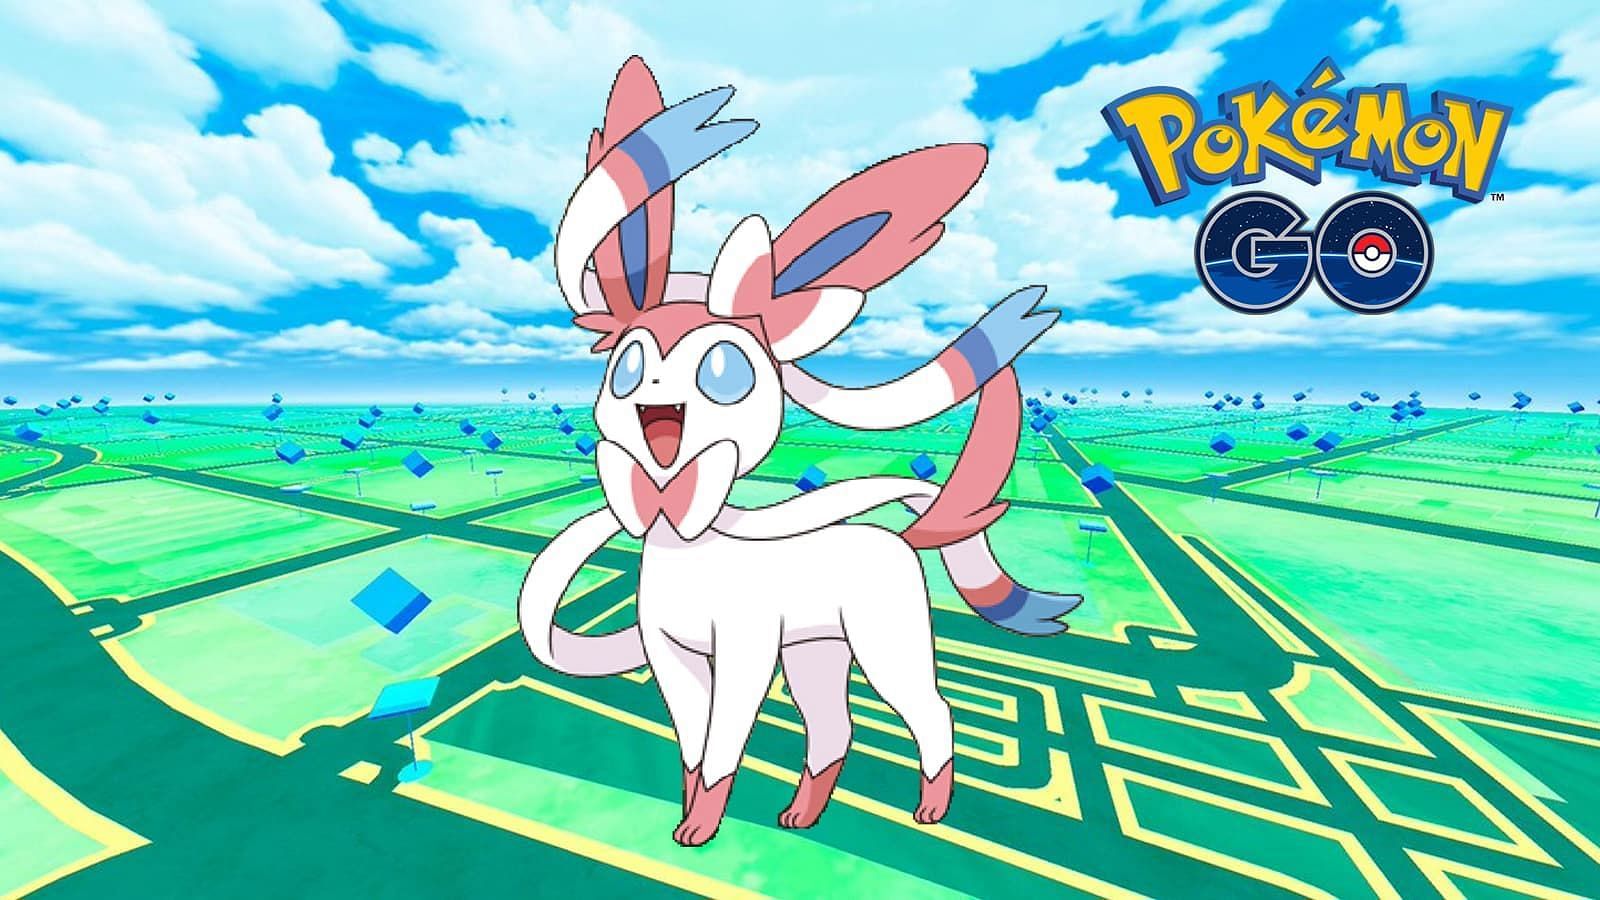 Eevee will need a little love in order to become Sylveon in Pokemon GO (Image via Niantic)